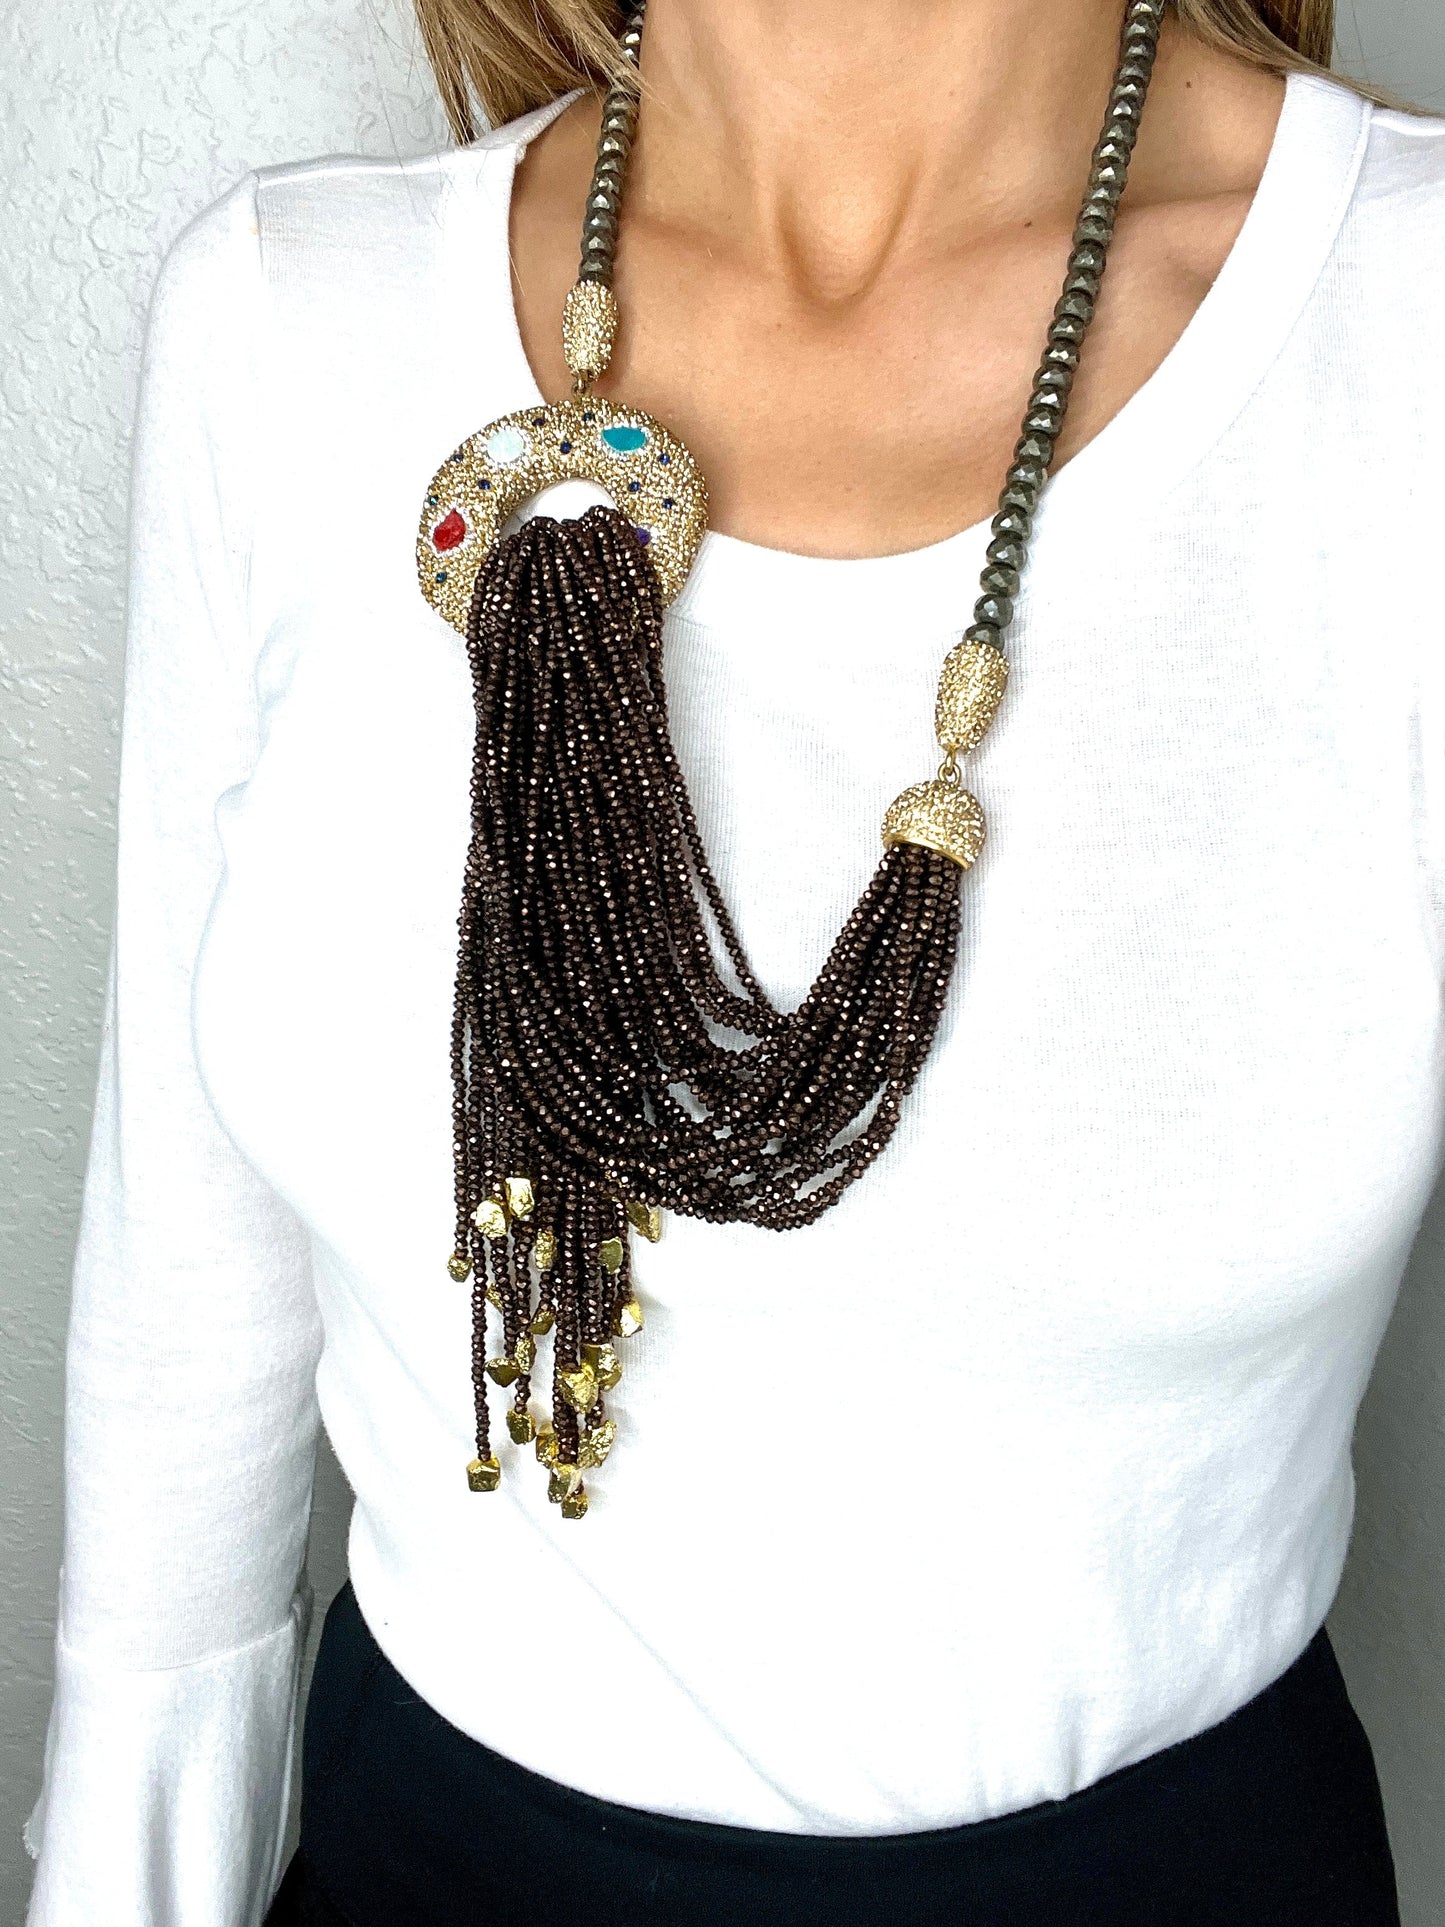 Load image into Gallery viewer, Brown Goddess Versatile Long Statement Lariat Necklace - Born To Glam
